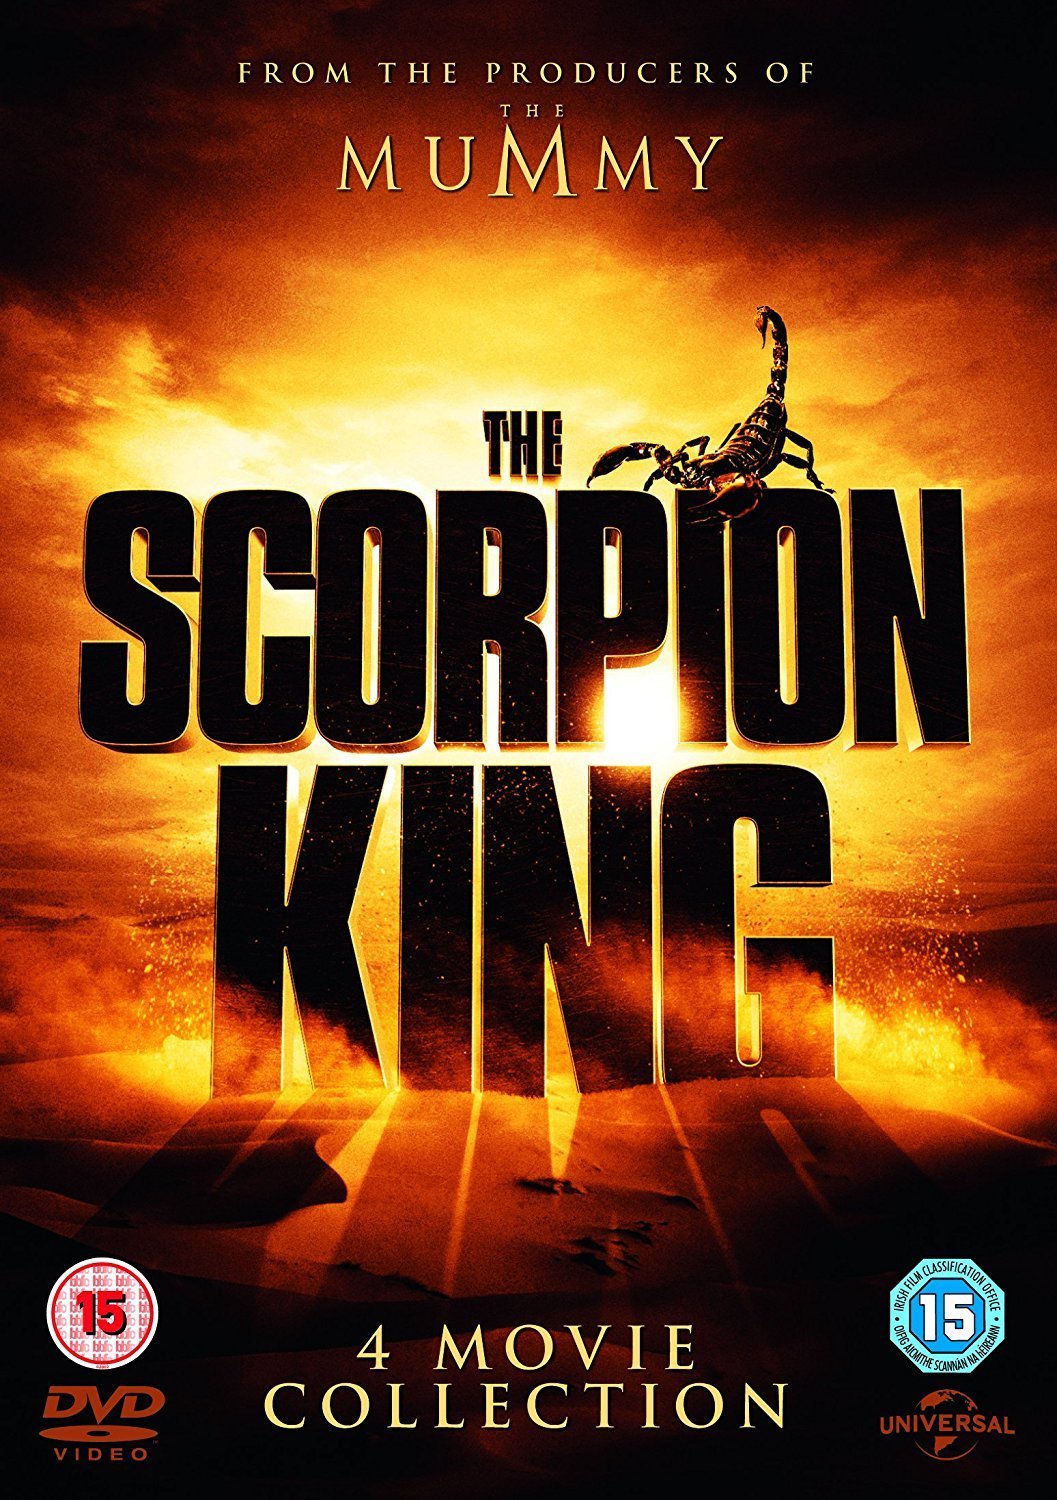 The Scorpion King/ The Scorpion King: Rise Of A Warrior/ The Scorpion King 3: Battle For Redemption/ The Scorpion King 4: Quest For Power (DVD)